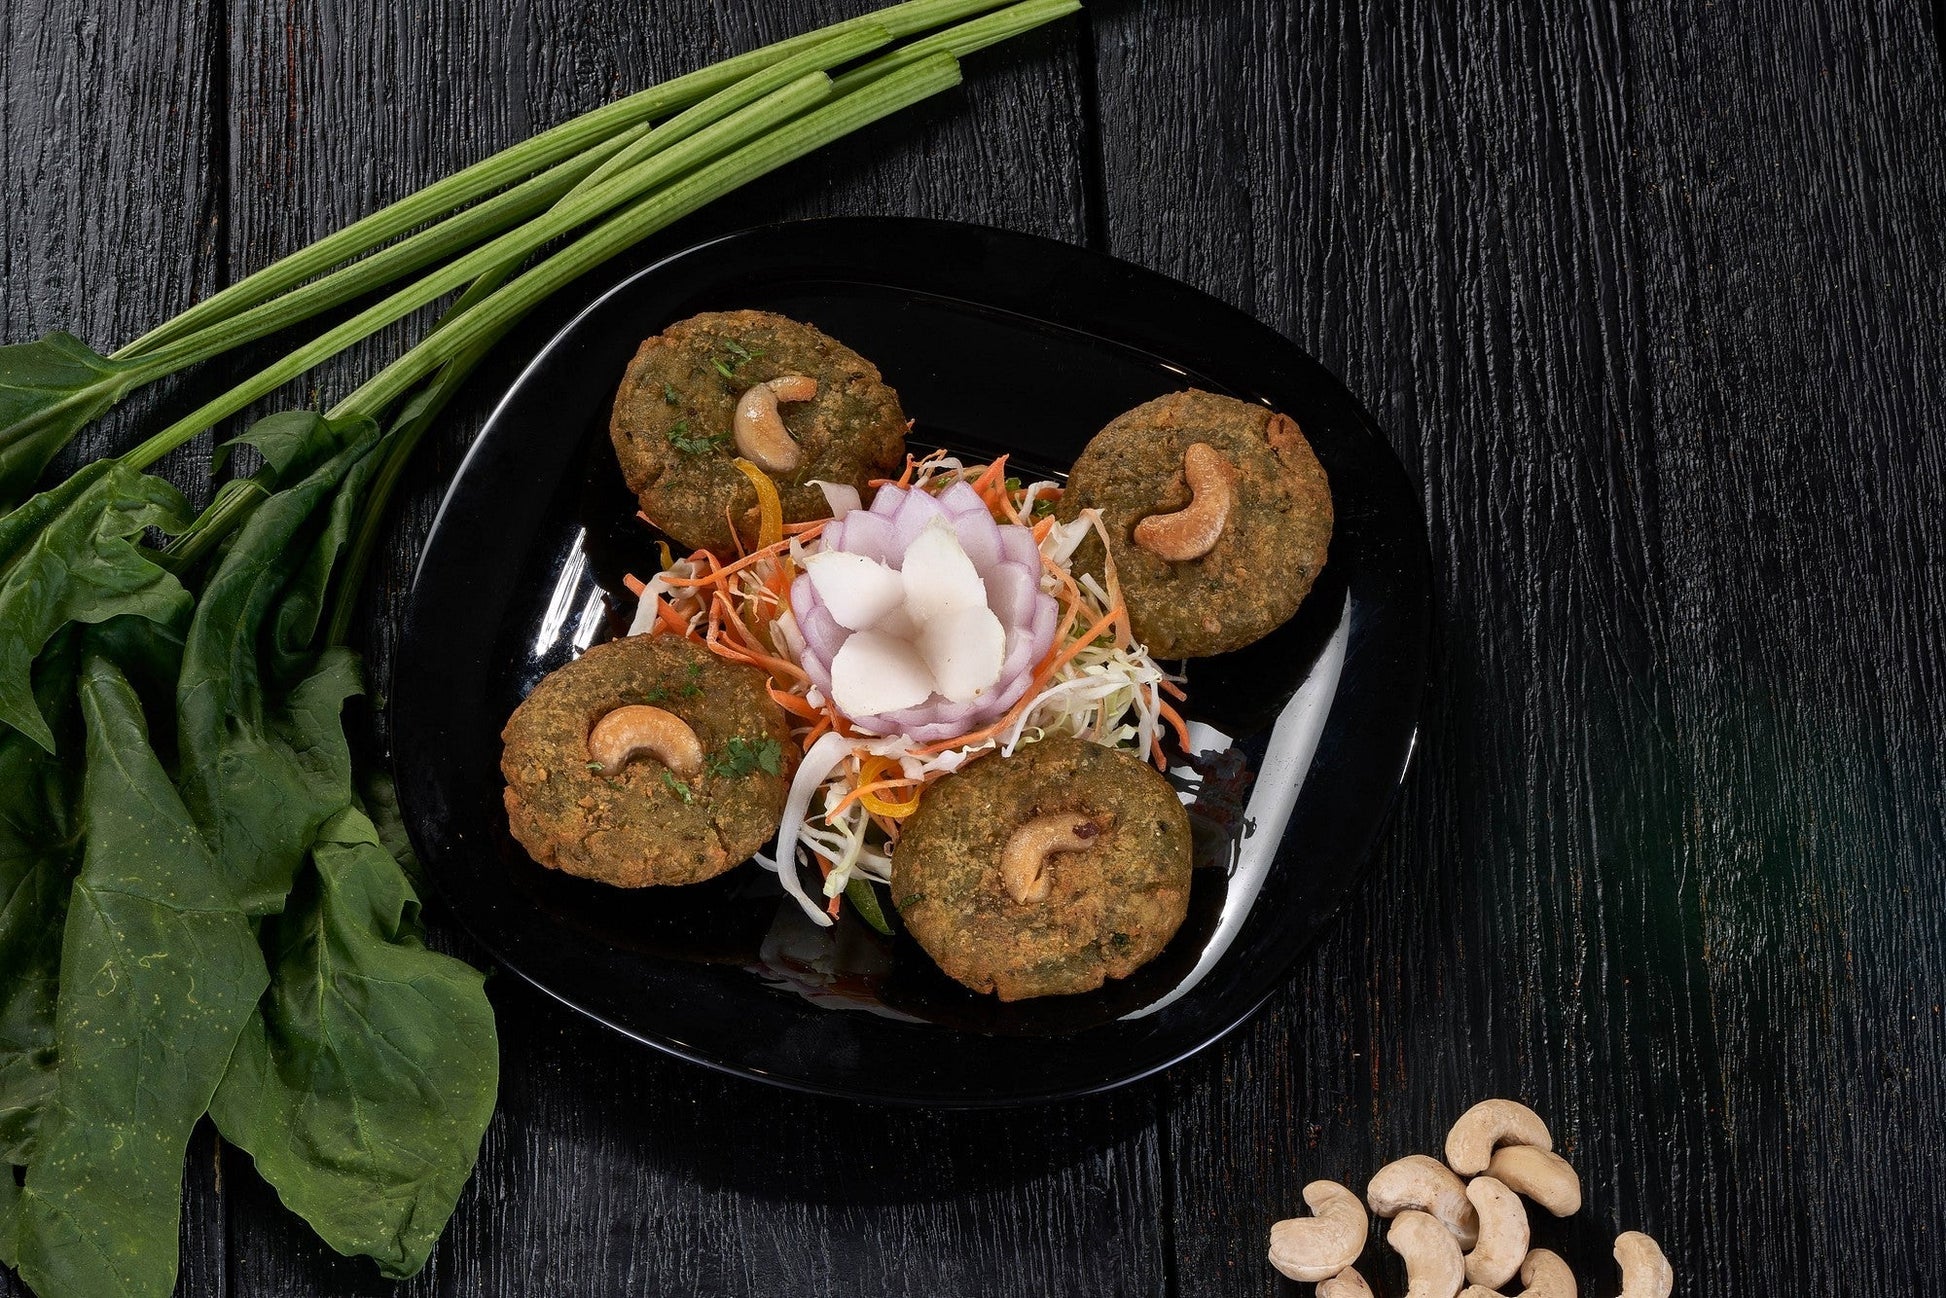 A crispy Harabara Kebab, a deep-fried patty made with spinach and fresh cottage cheese